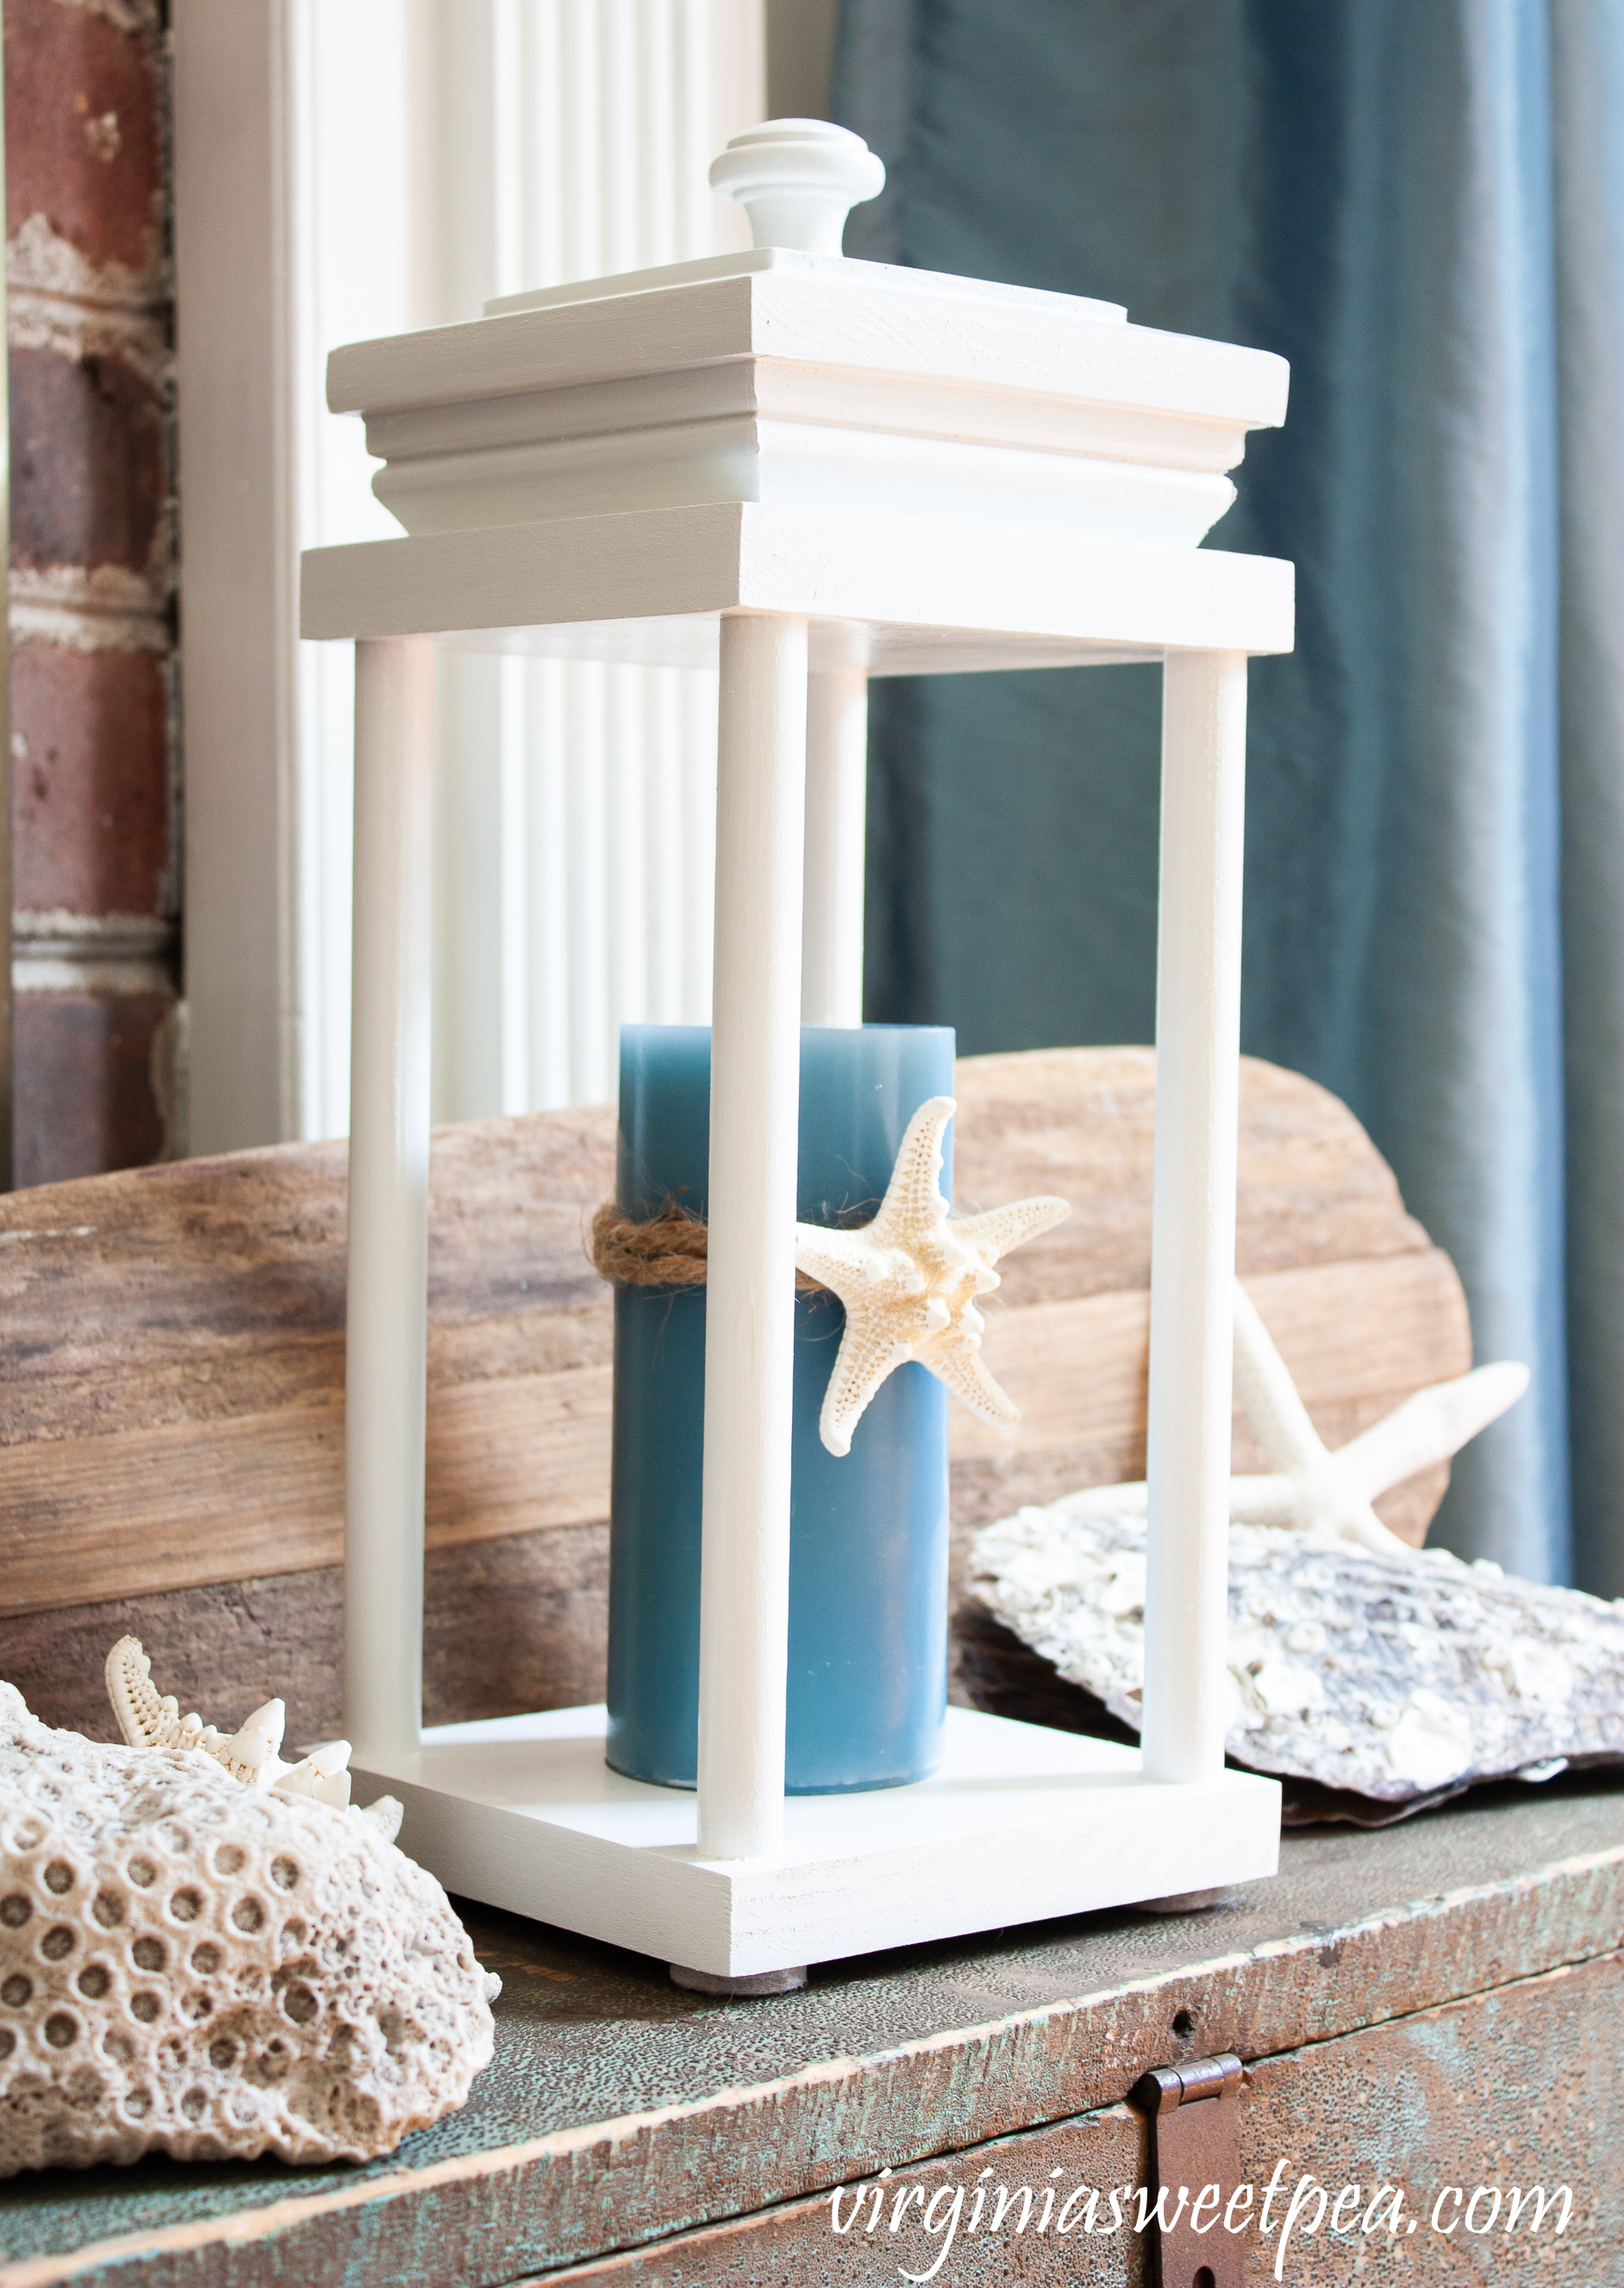 Use a Lantern for summer decorating with a coastal vibe.